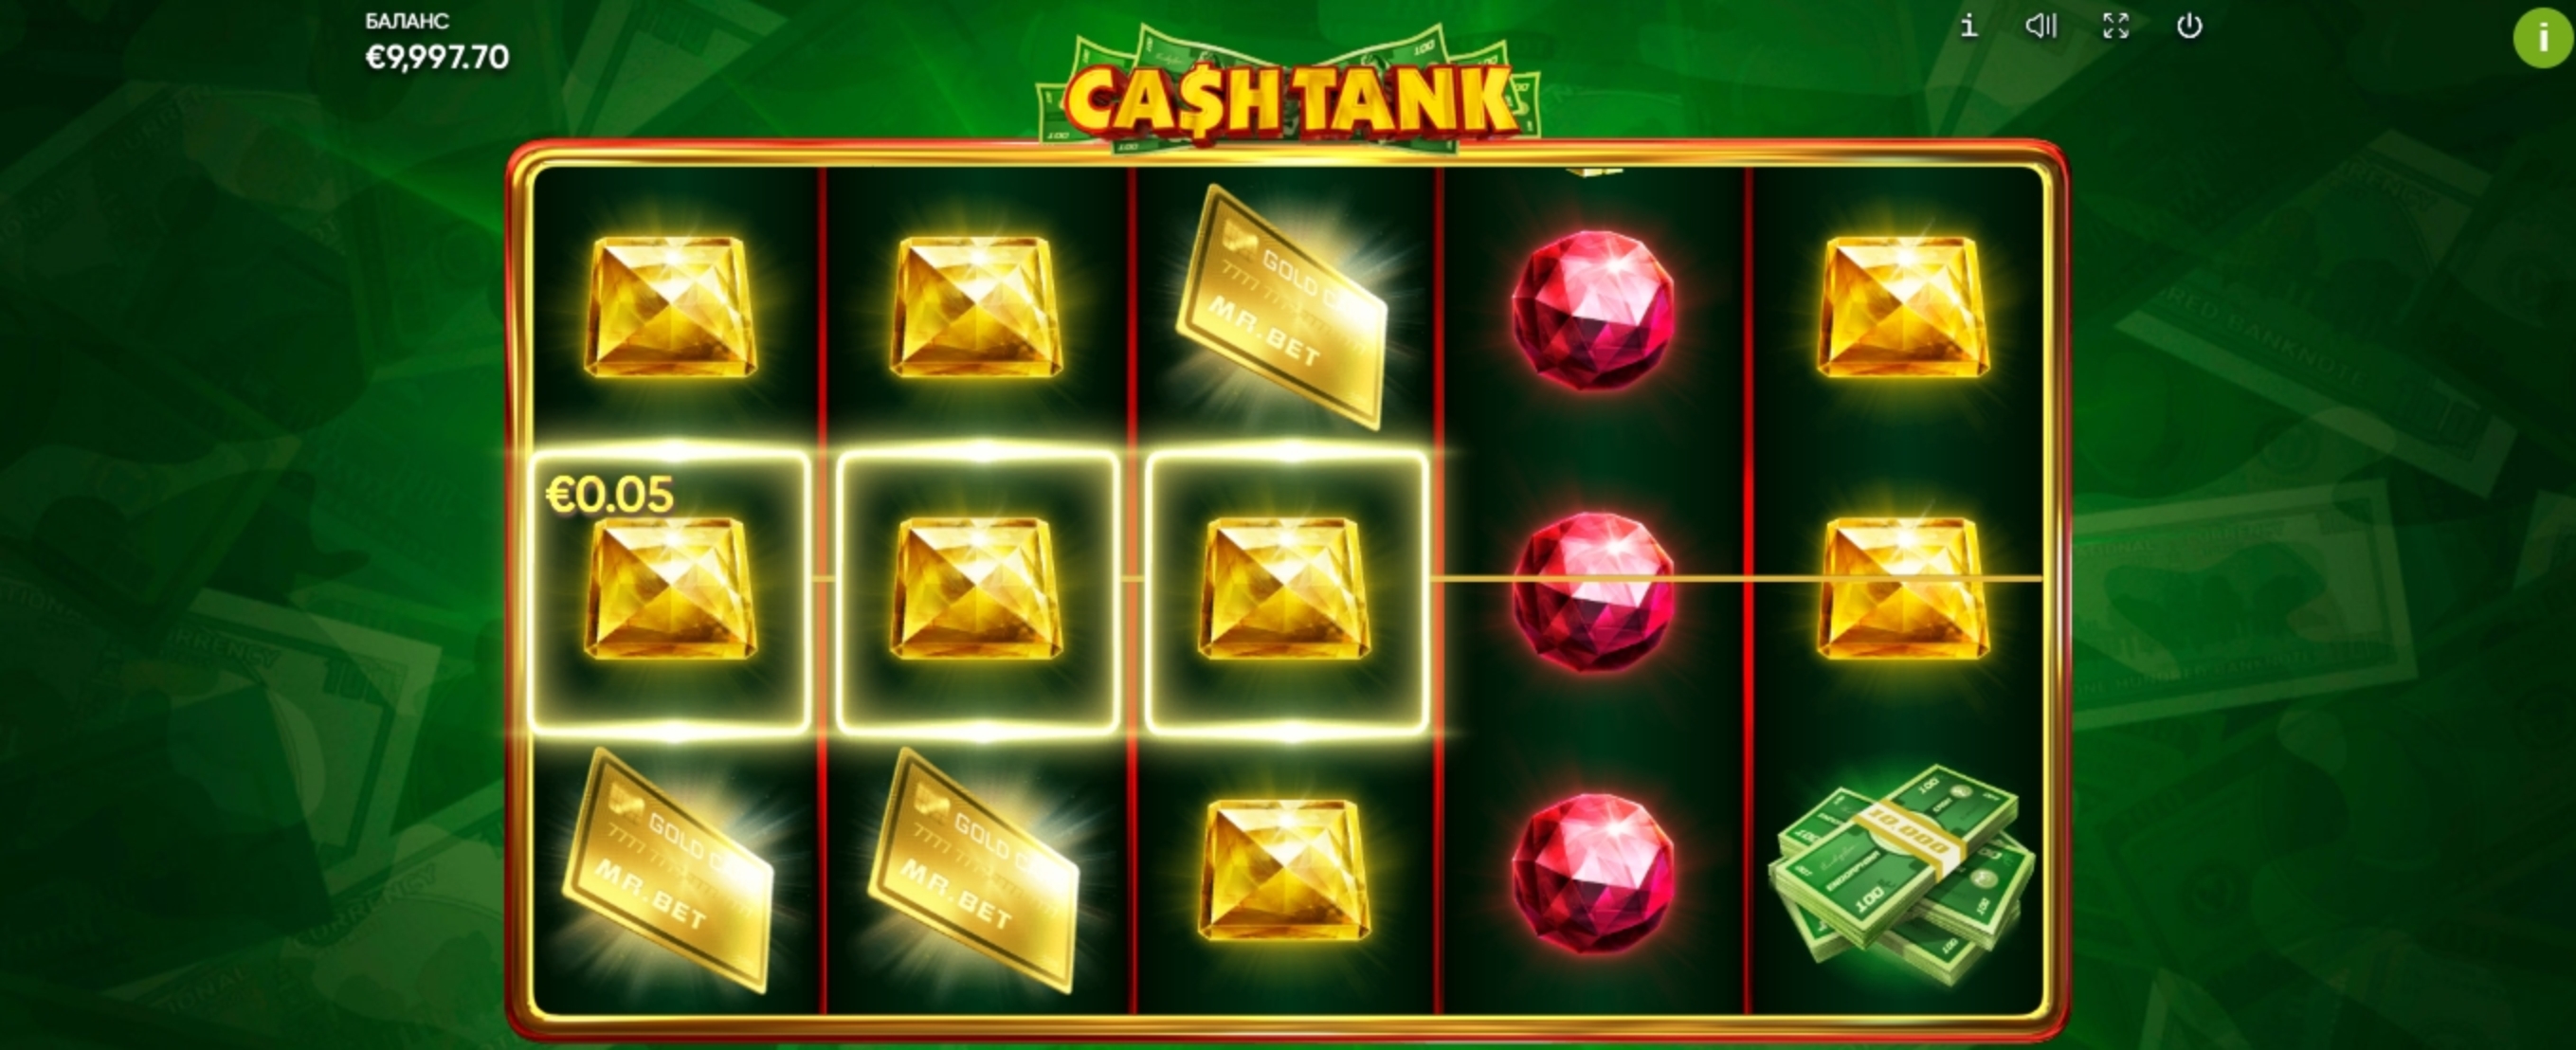 Win Money in Cash Tank Free Slot Game by Endorphina